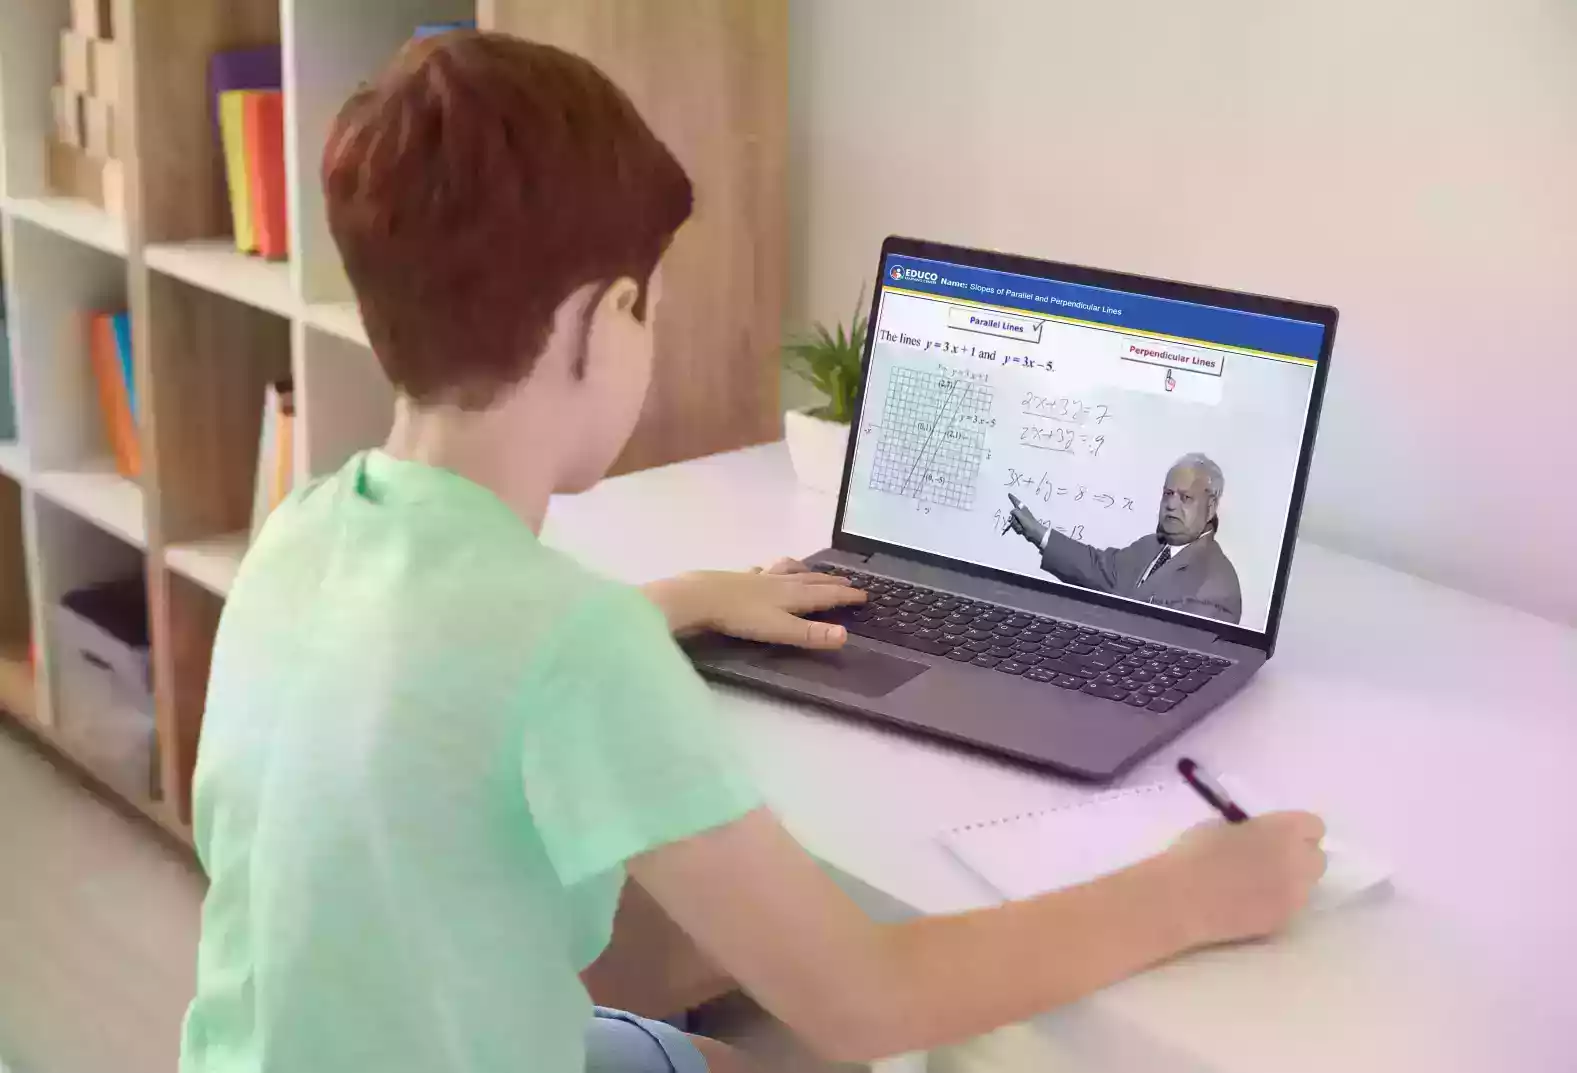 A boy taking Educo Learning Center math course on his laptop